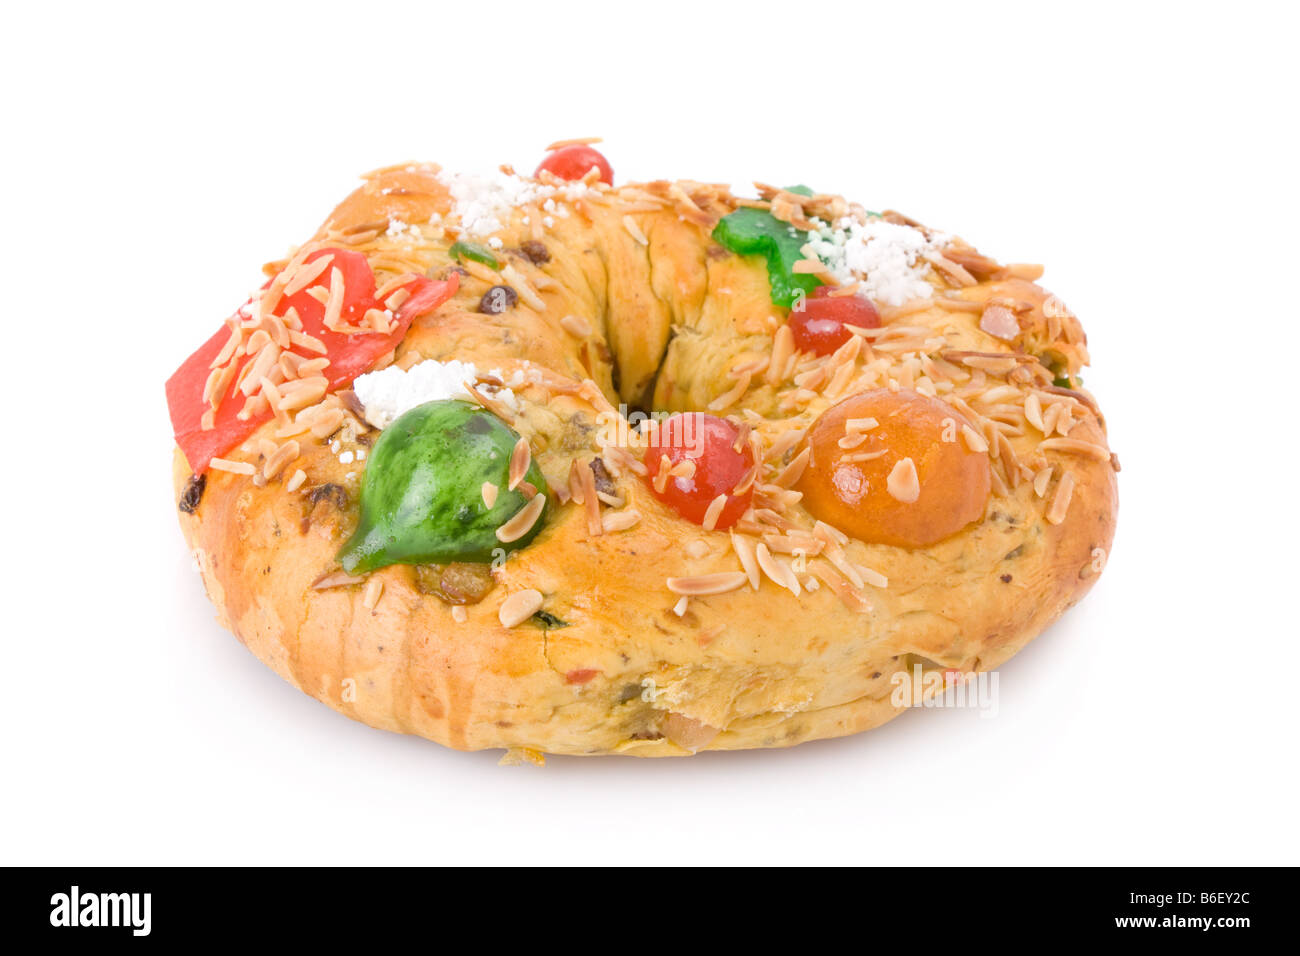 Traditional Portuguese Christmas cake, called Bolo Rei, made with candied fruits Stock Photo